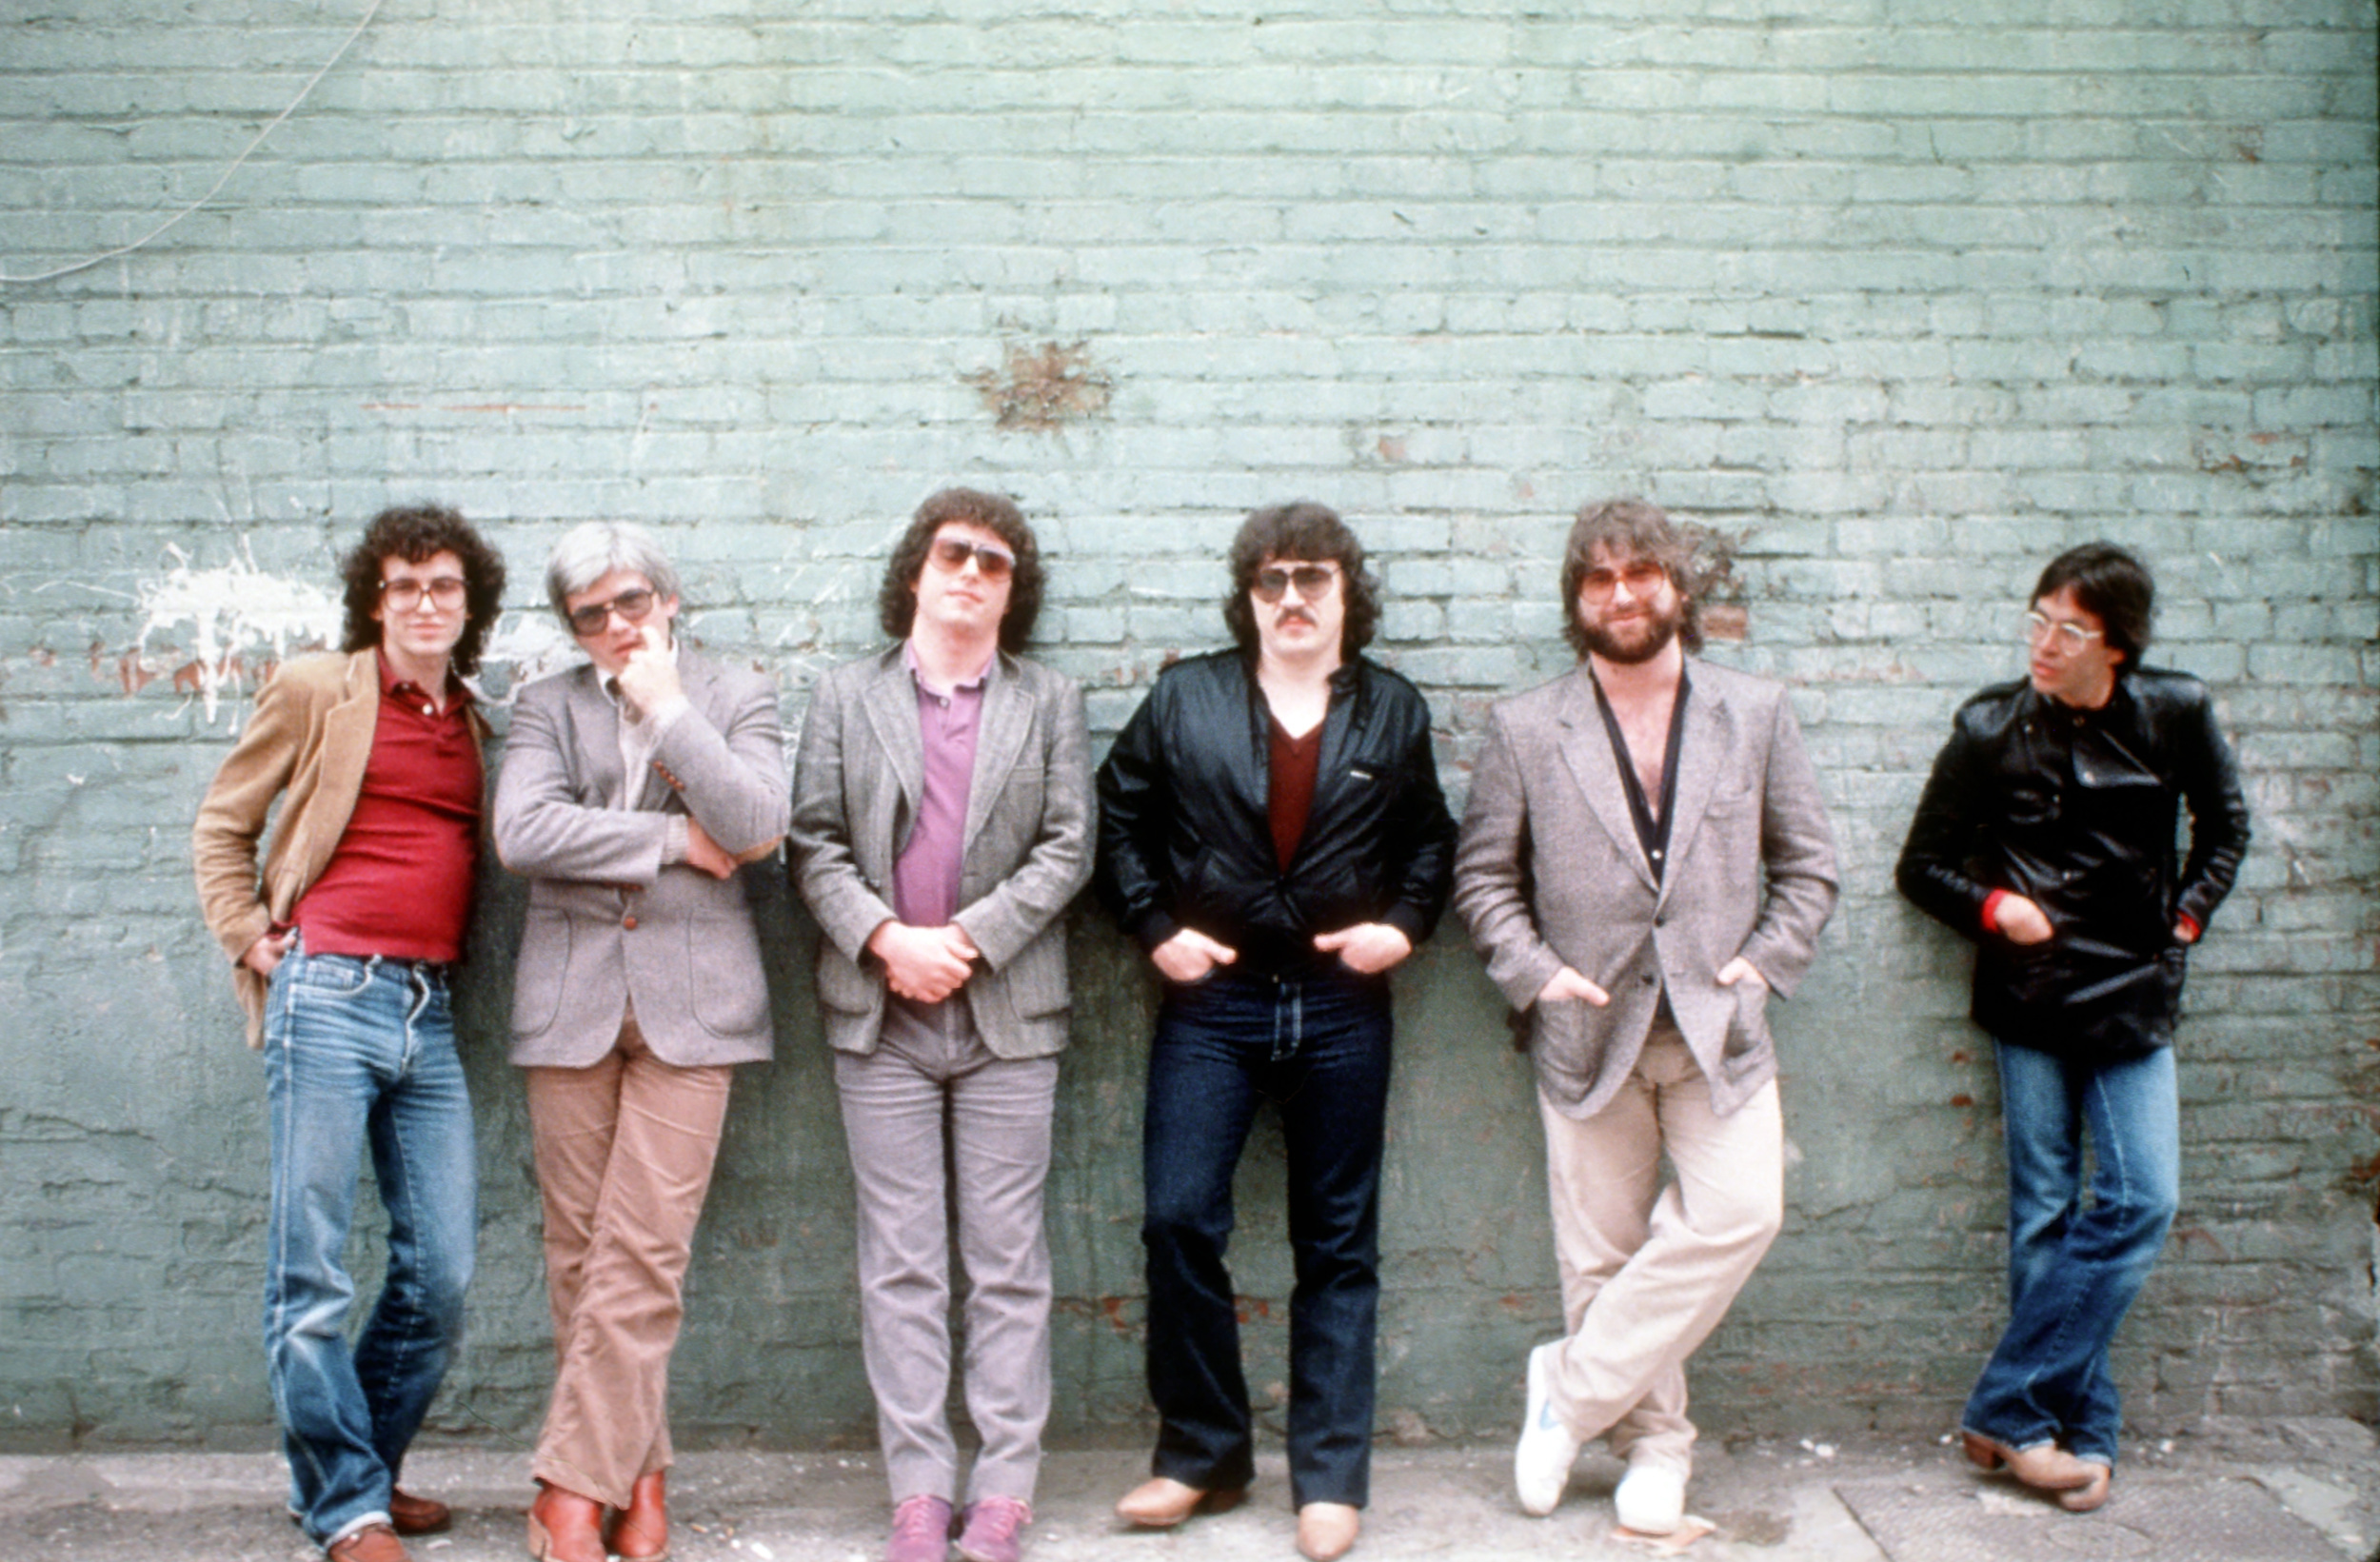 <p>Toto rightfully has a place in the yacht rock world, but the band also broke into the top-40, FM radio, and MTV mainstream with the release of 1982's <em>Toto IV</em>. <a href="https://www.youtube.com/watch?v=qmOLtTGvsbM">"Rosanna"</a> was a big reason for the album's success, peaking at No. 2 on <em>Billboard</em>'s Hot 100 and winning the Record of the Year Grammy Award. Sure, it's not typical yacht rock fare, per se. It's certainly heavier than other popular tracks on this list, but it's certainly a product of AOR and still routinely played in dentist offices throughout America. </p><p>You may also like: <a href='https://www.yardbarker.com/entertainment/articles/the_best_karaoke_songs_from_the_2020s_031124/s1__39920474'>The best karaoke songs from the 2020s</a></p>